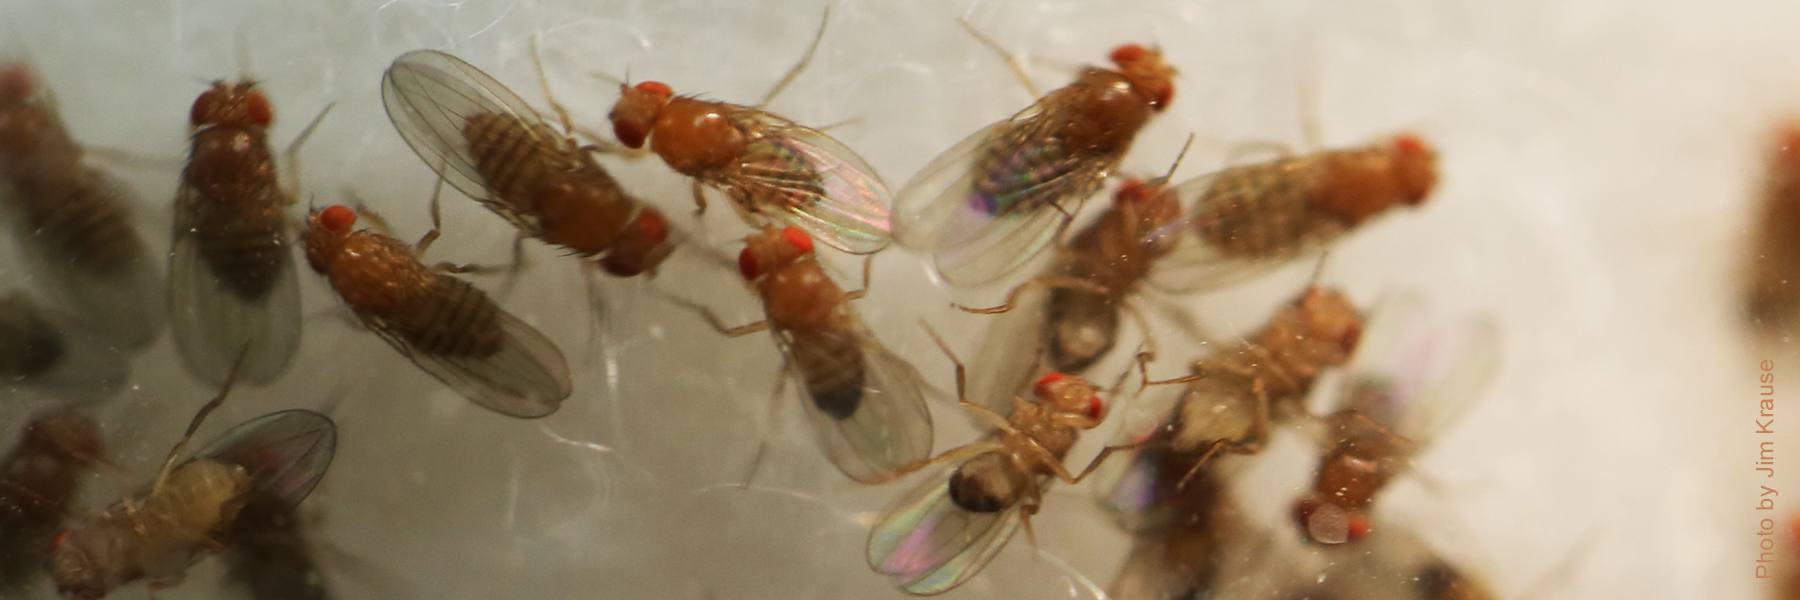 Several fruit flies with red eyes were photographed by Jim Krause.